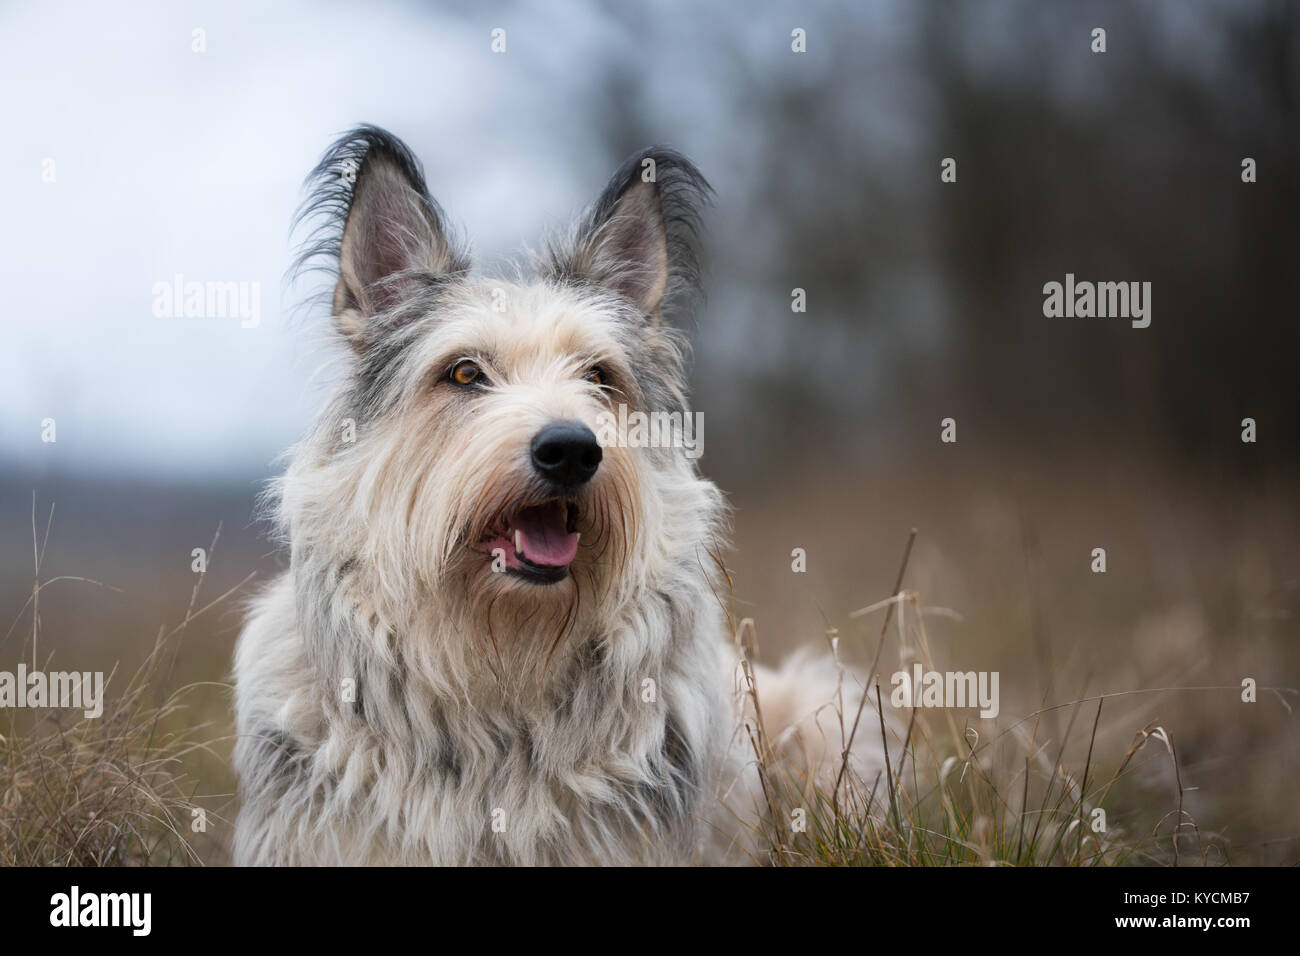 Berger picard dog in winter field with long hair Stock Photo